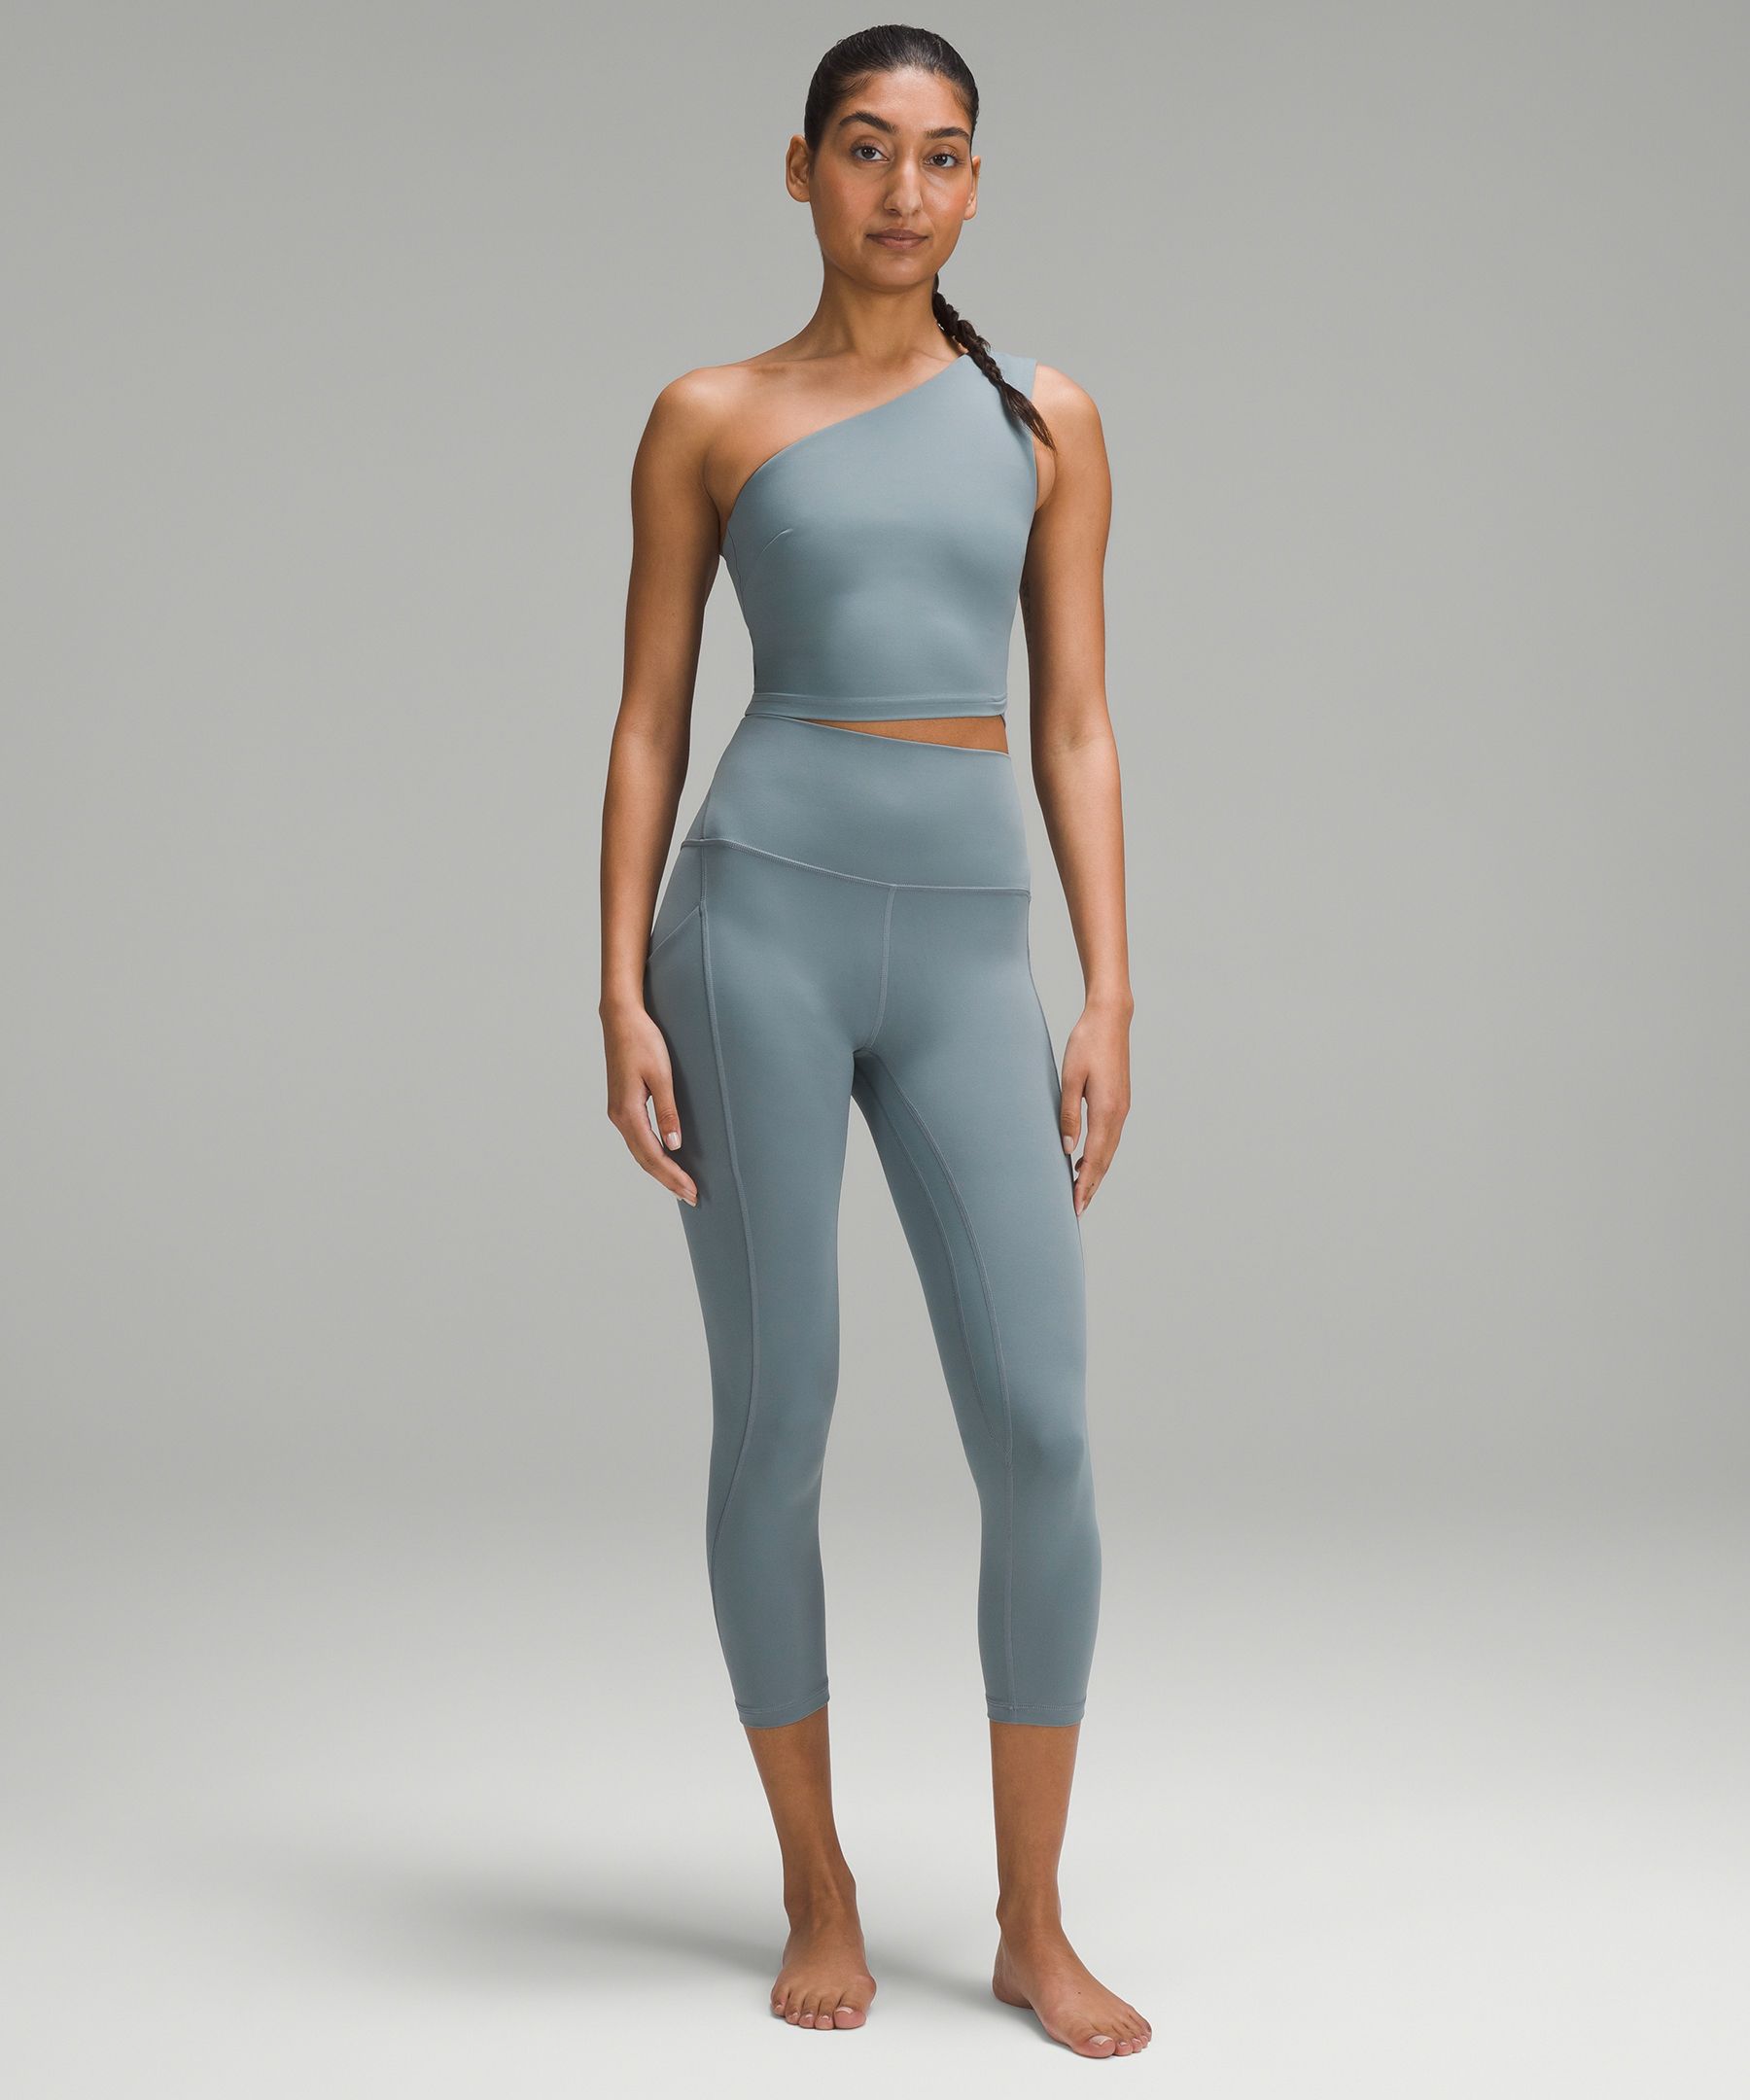 Lululemon Align High Rise Crop with Pockets 23 - Water Drop